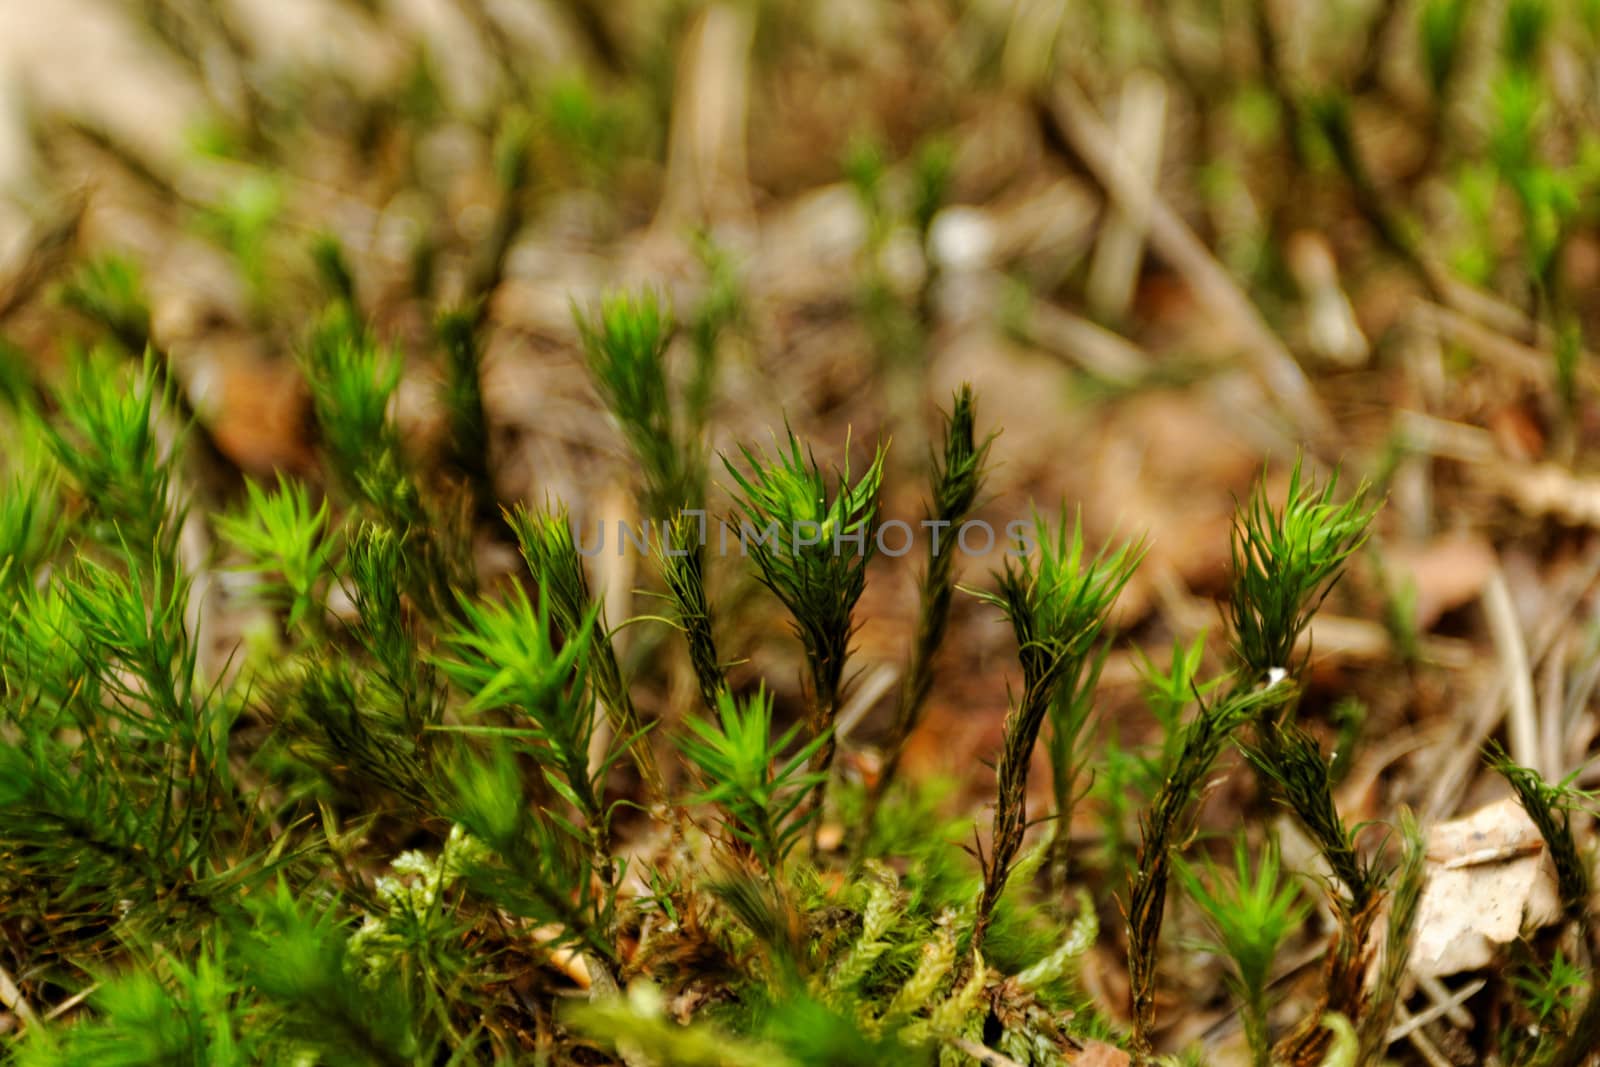 close-up picture about the green moss (macro)